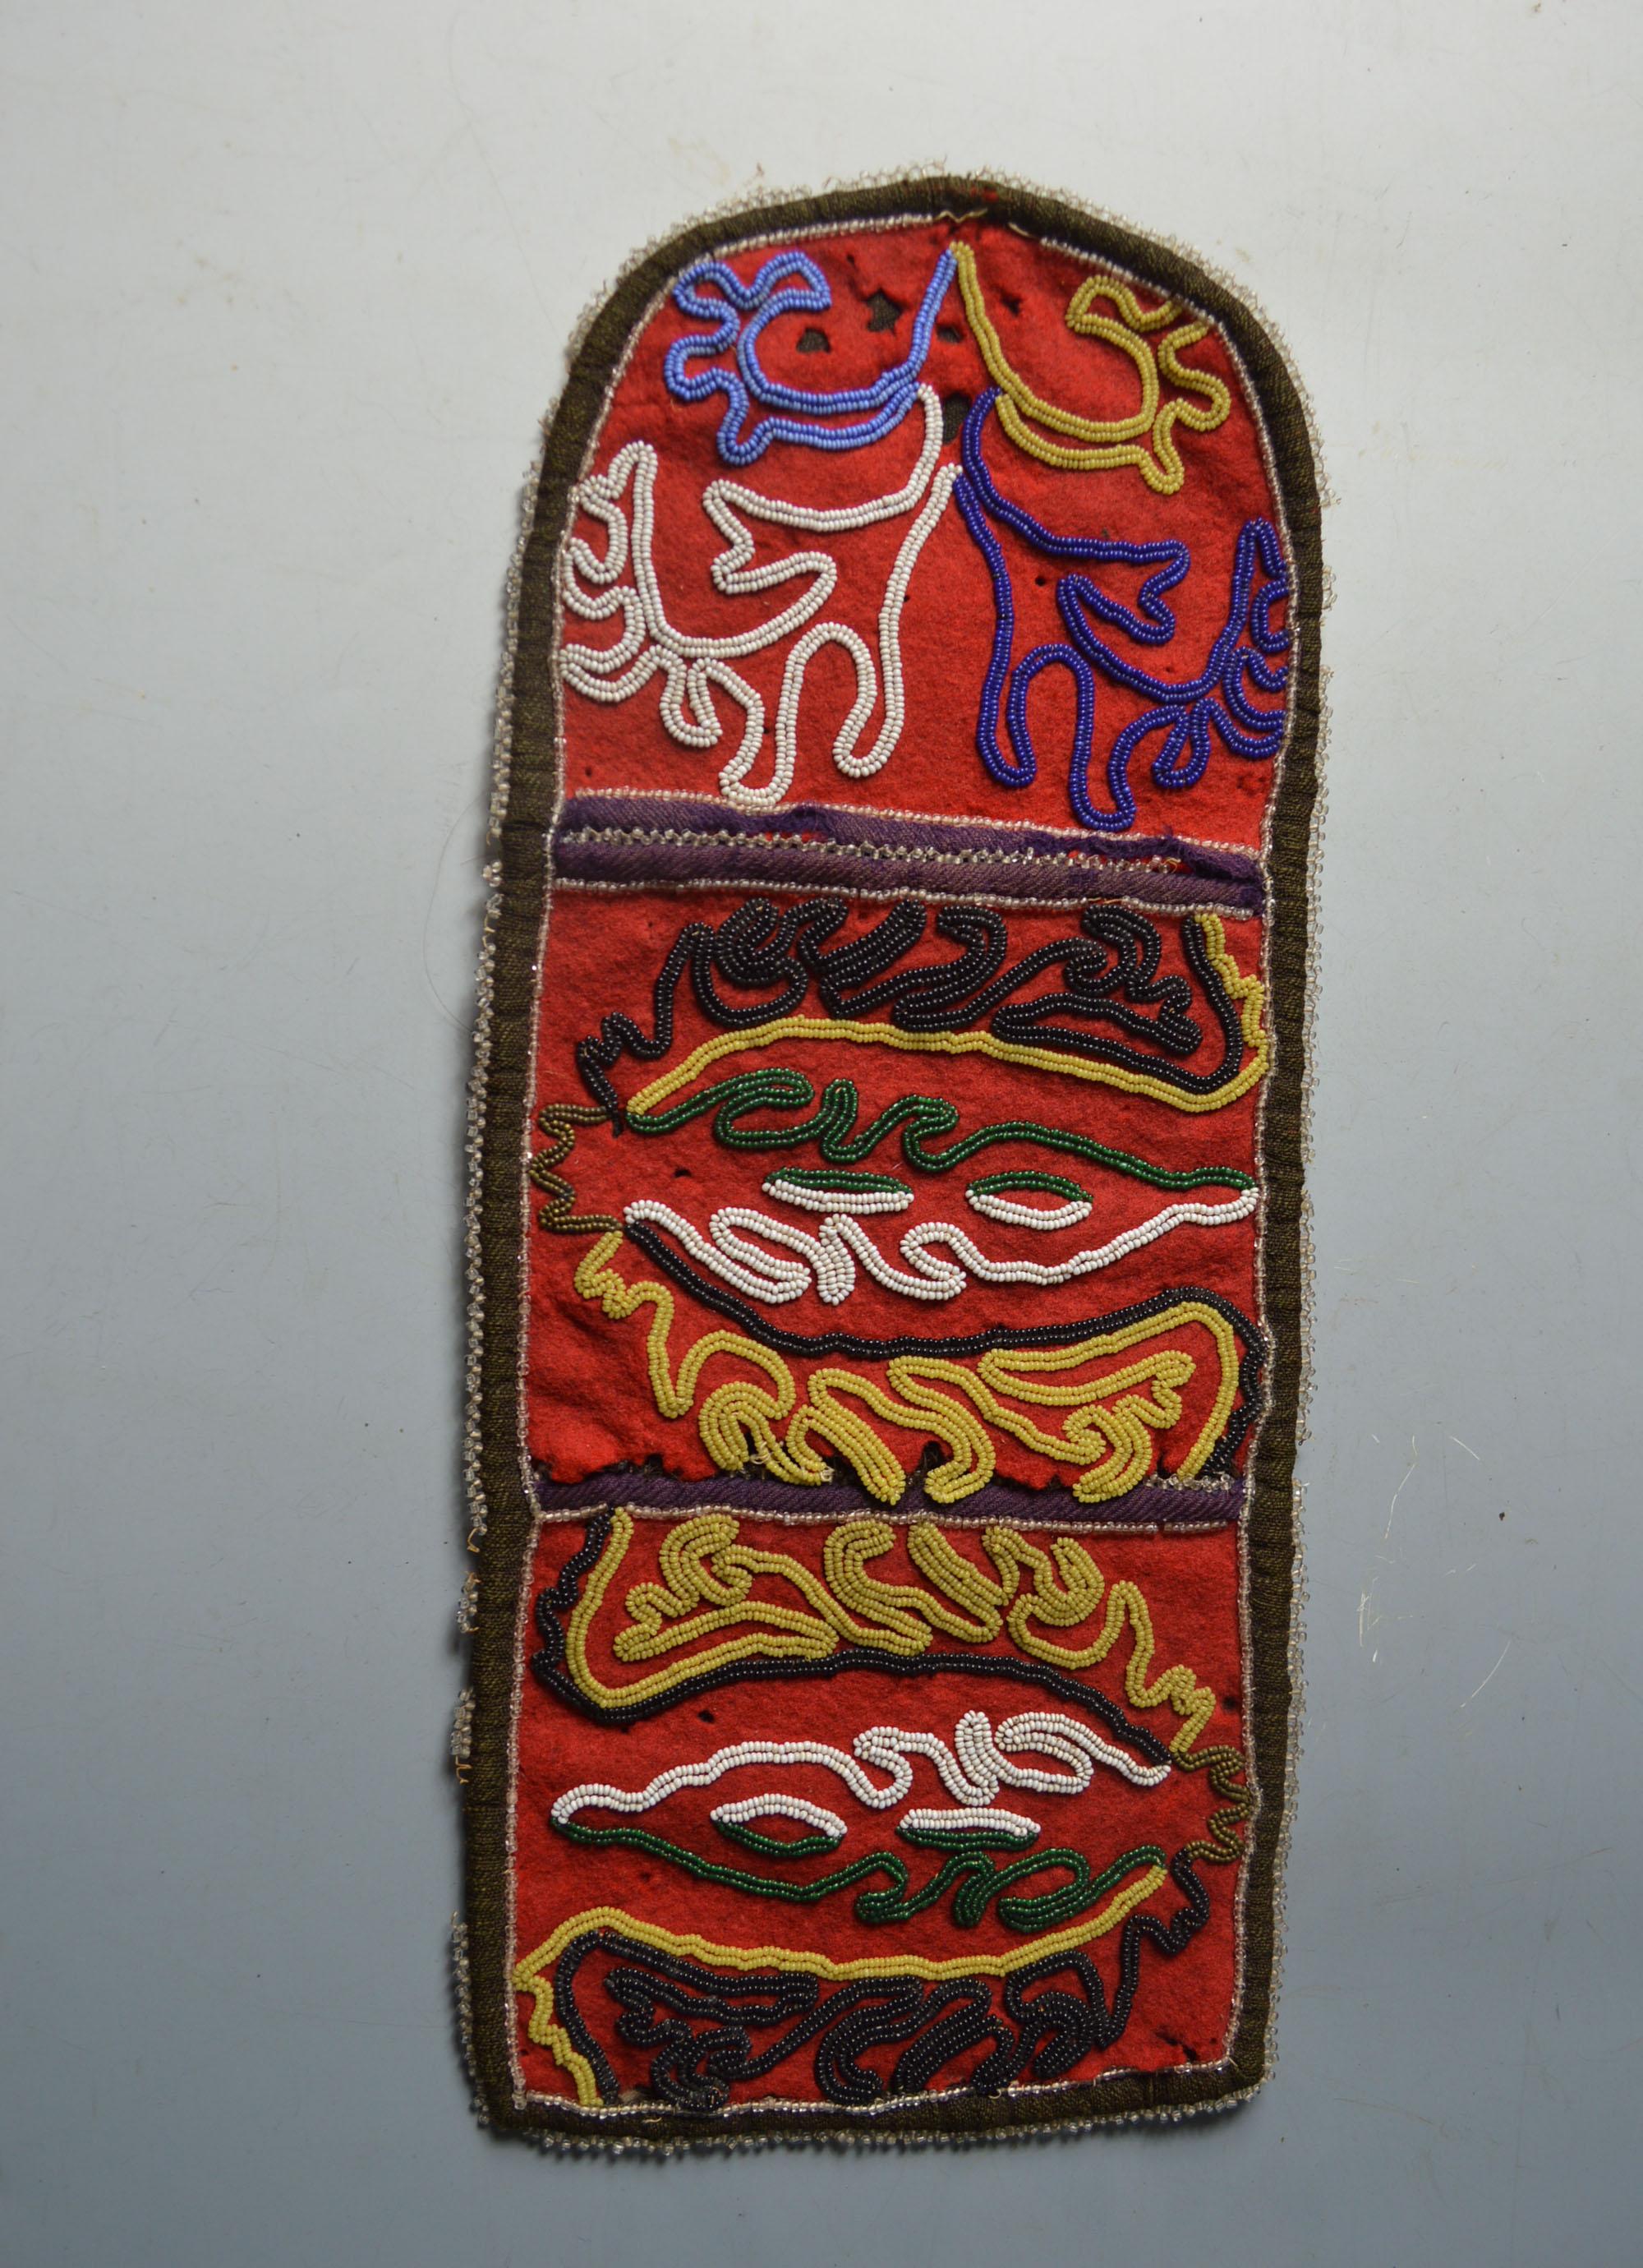 Native American Rare Tlingit Beaded pouch or wall pocket
Northwest Coast America
Cloth and colored glass beads, with three panels of foliage decoration,
Period late 19th century,
34 cm long.
Condition: Minor damage.